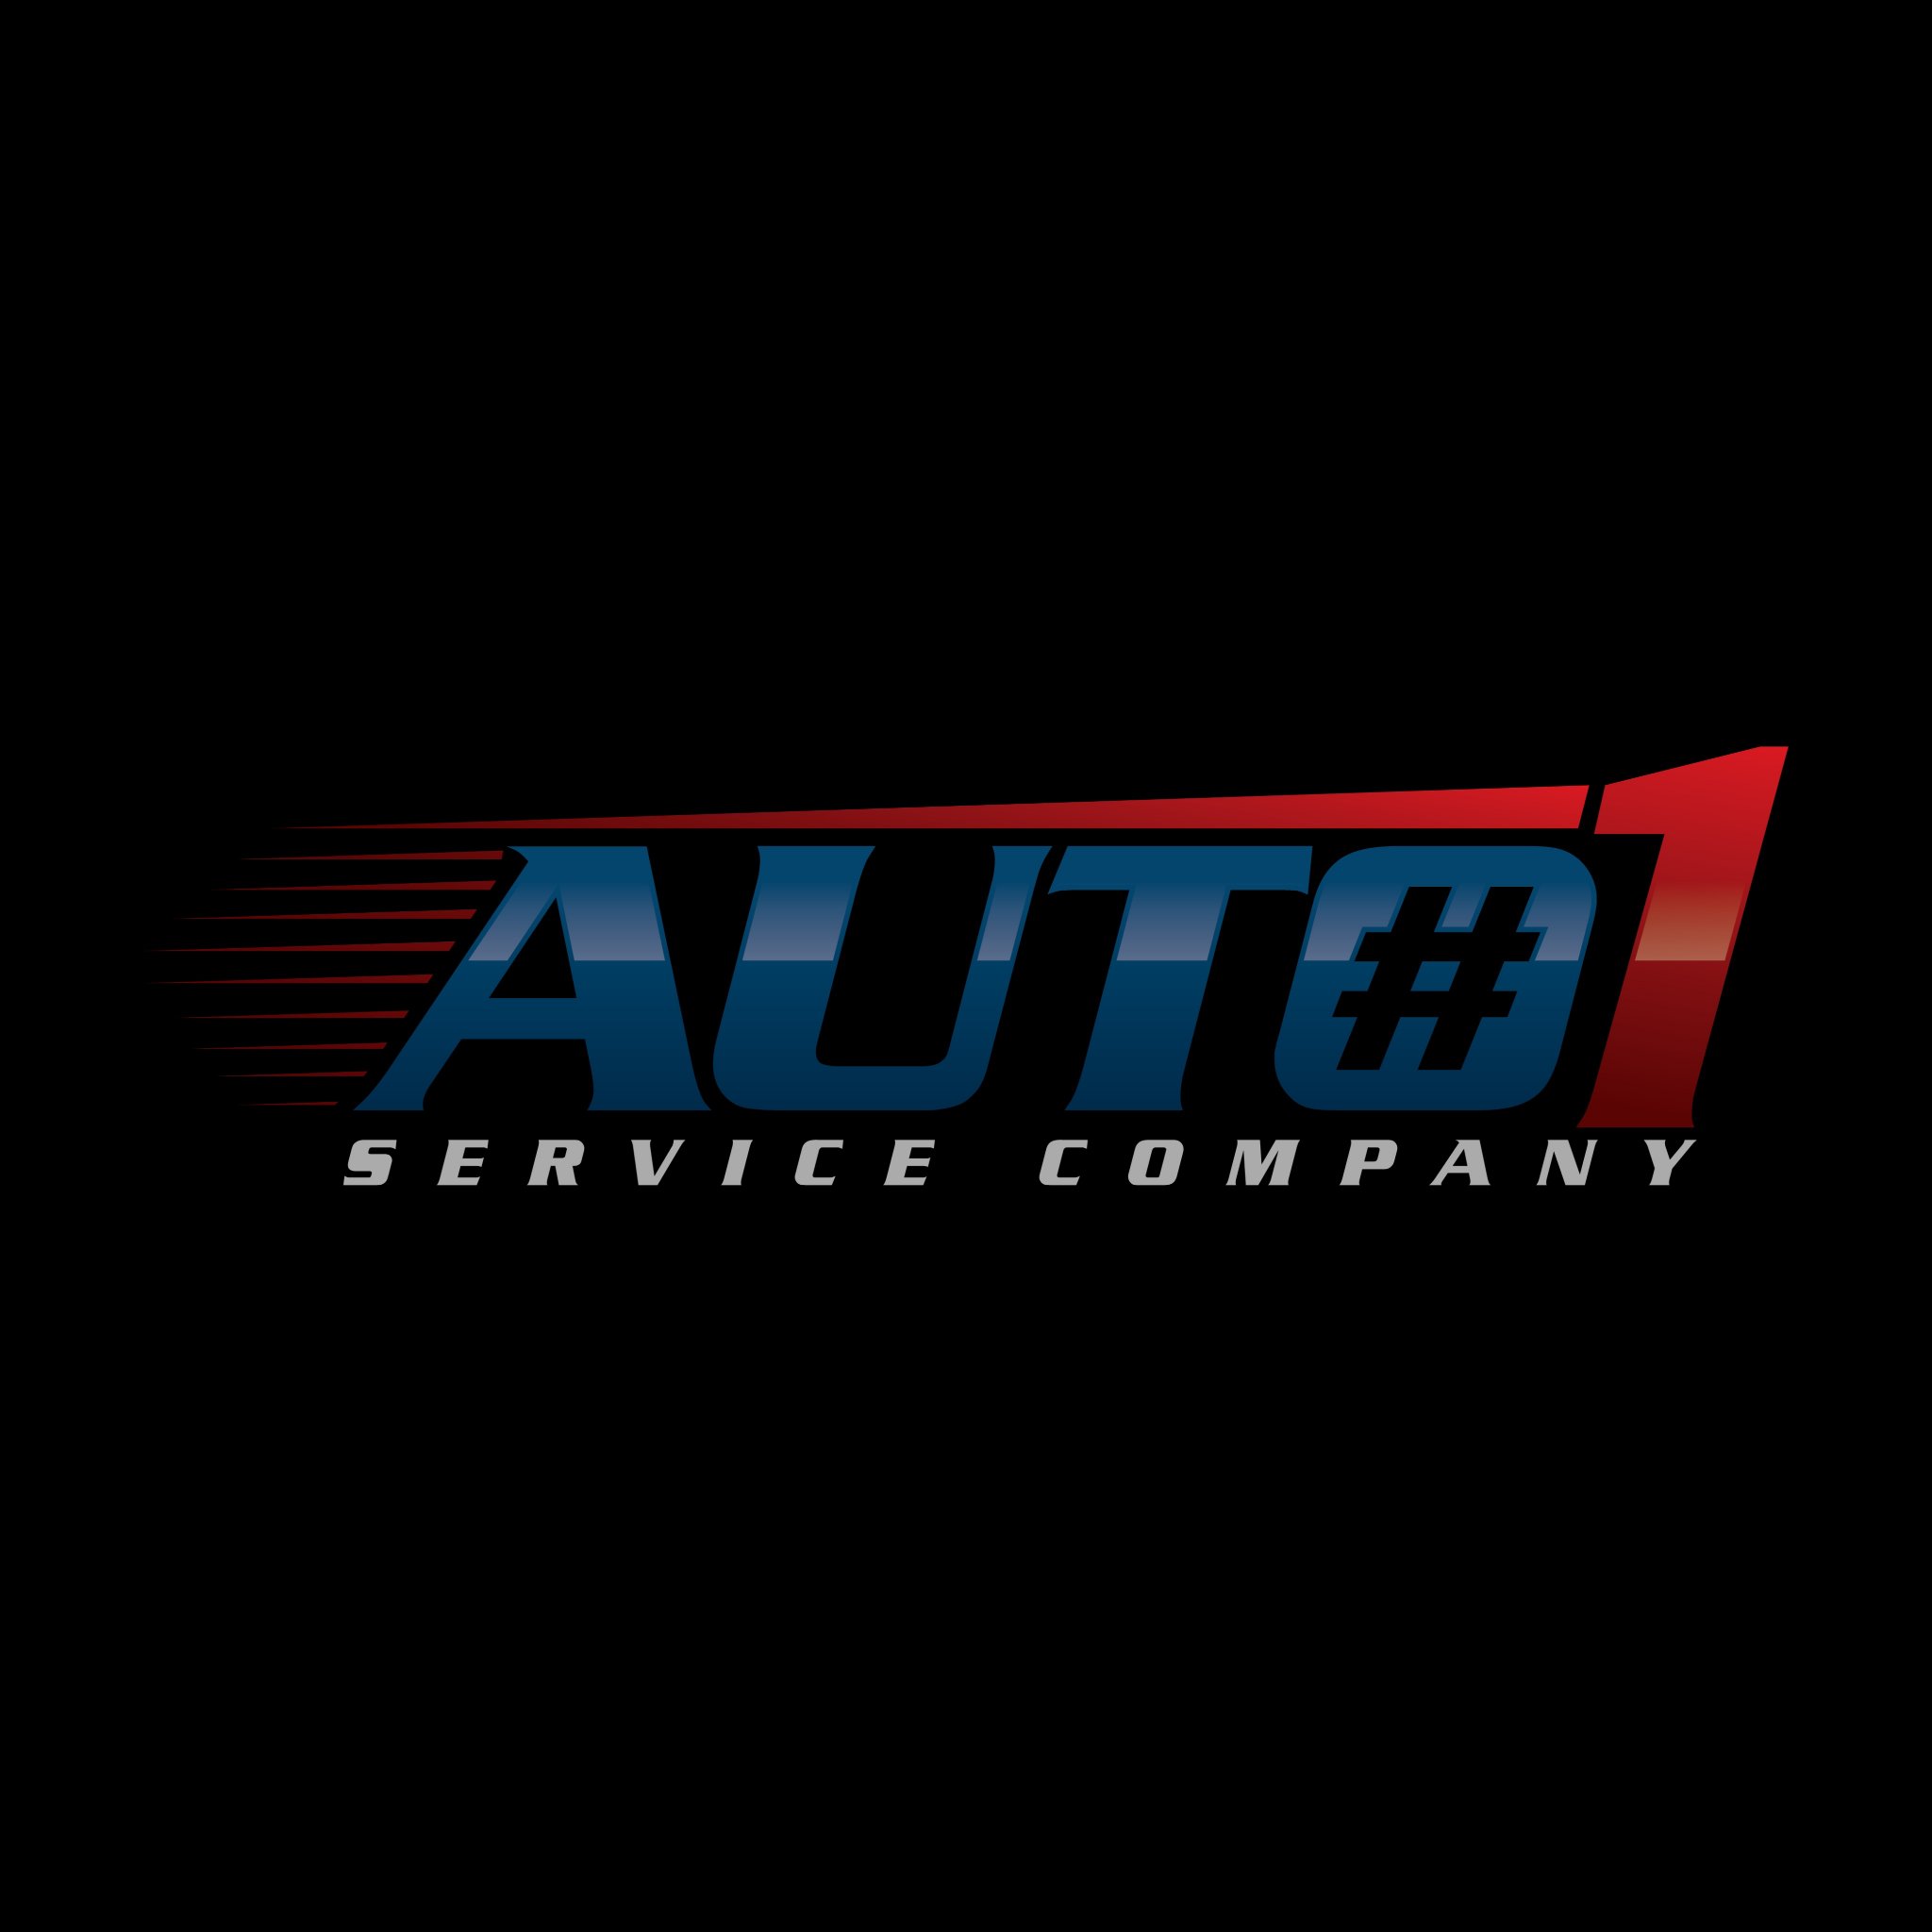 We provide vehicle service contract to be purchased by a consumer to cover the costs associated with vehicle repair, including parts and labor.